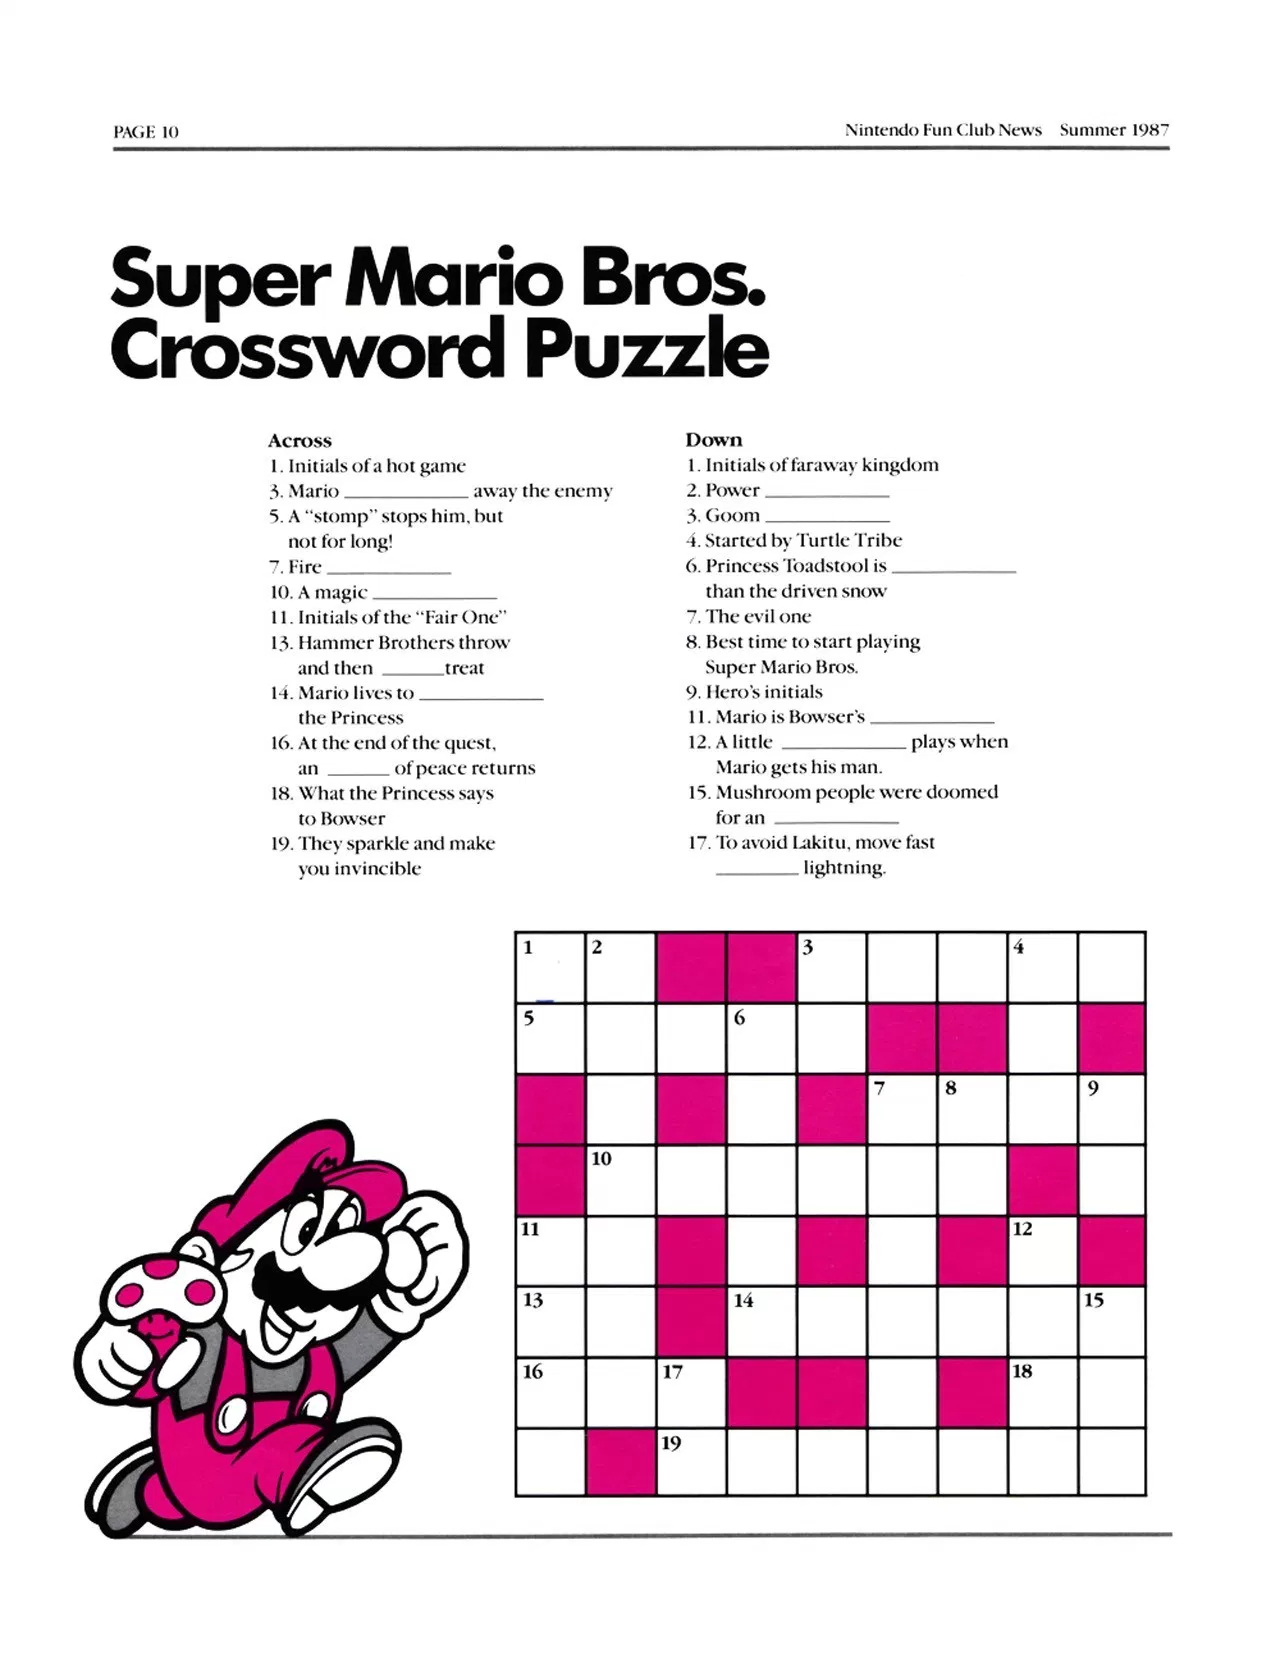 This Crossword Puzzle Is Bs - Video Game Forums - Printable Crossword Puzzles Video Games